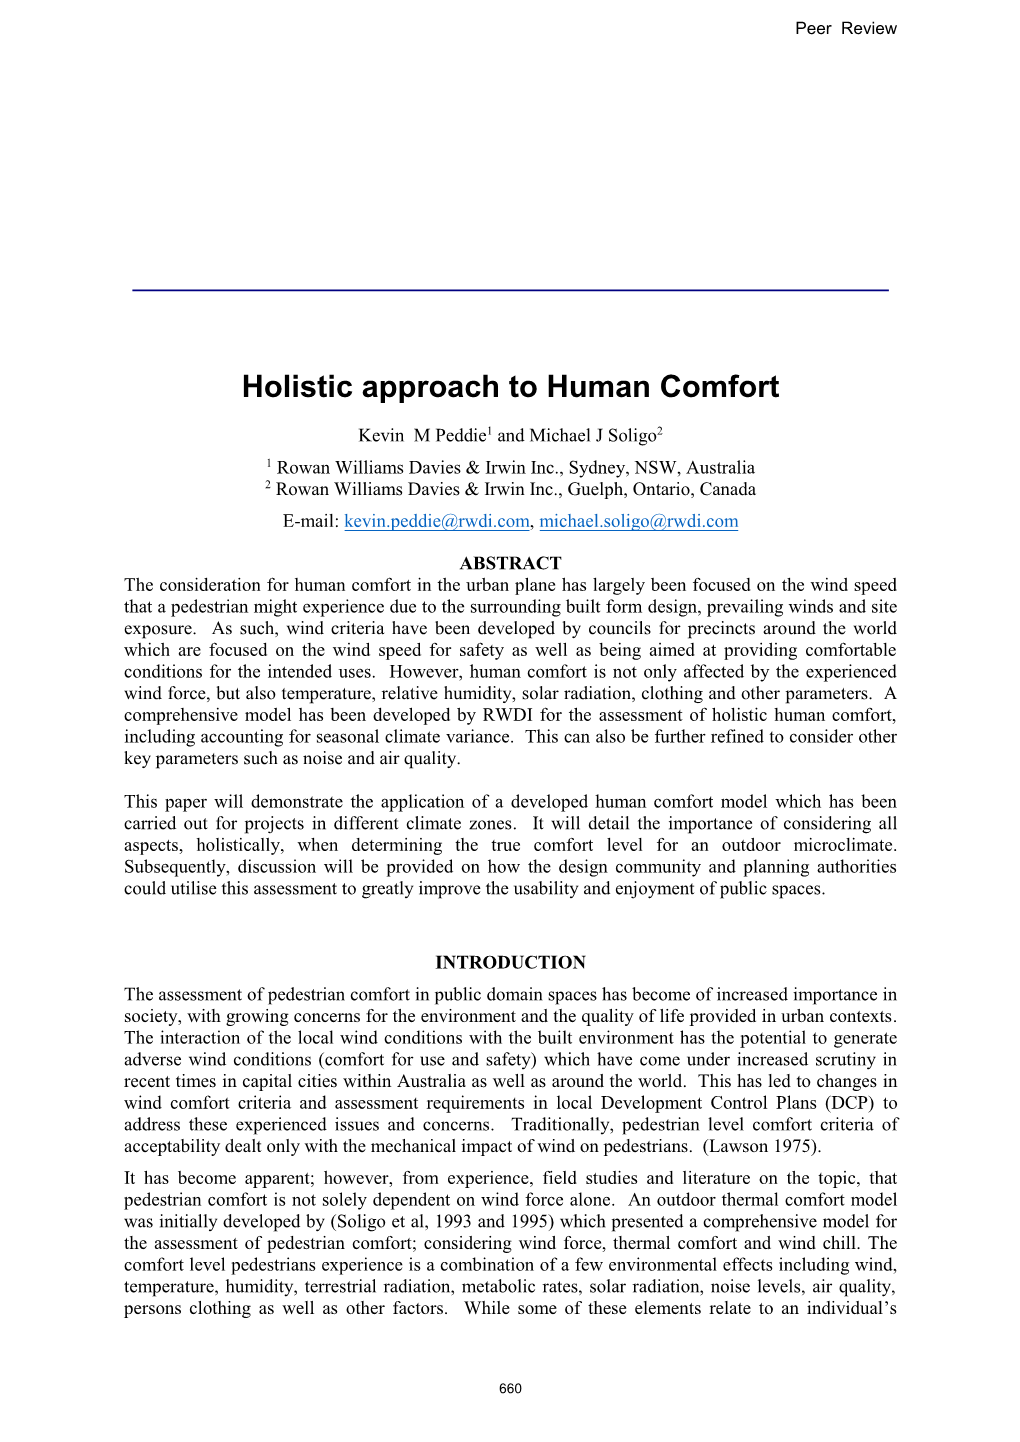 Holistic Approach to Human Comfort